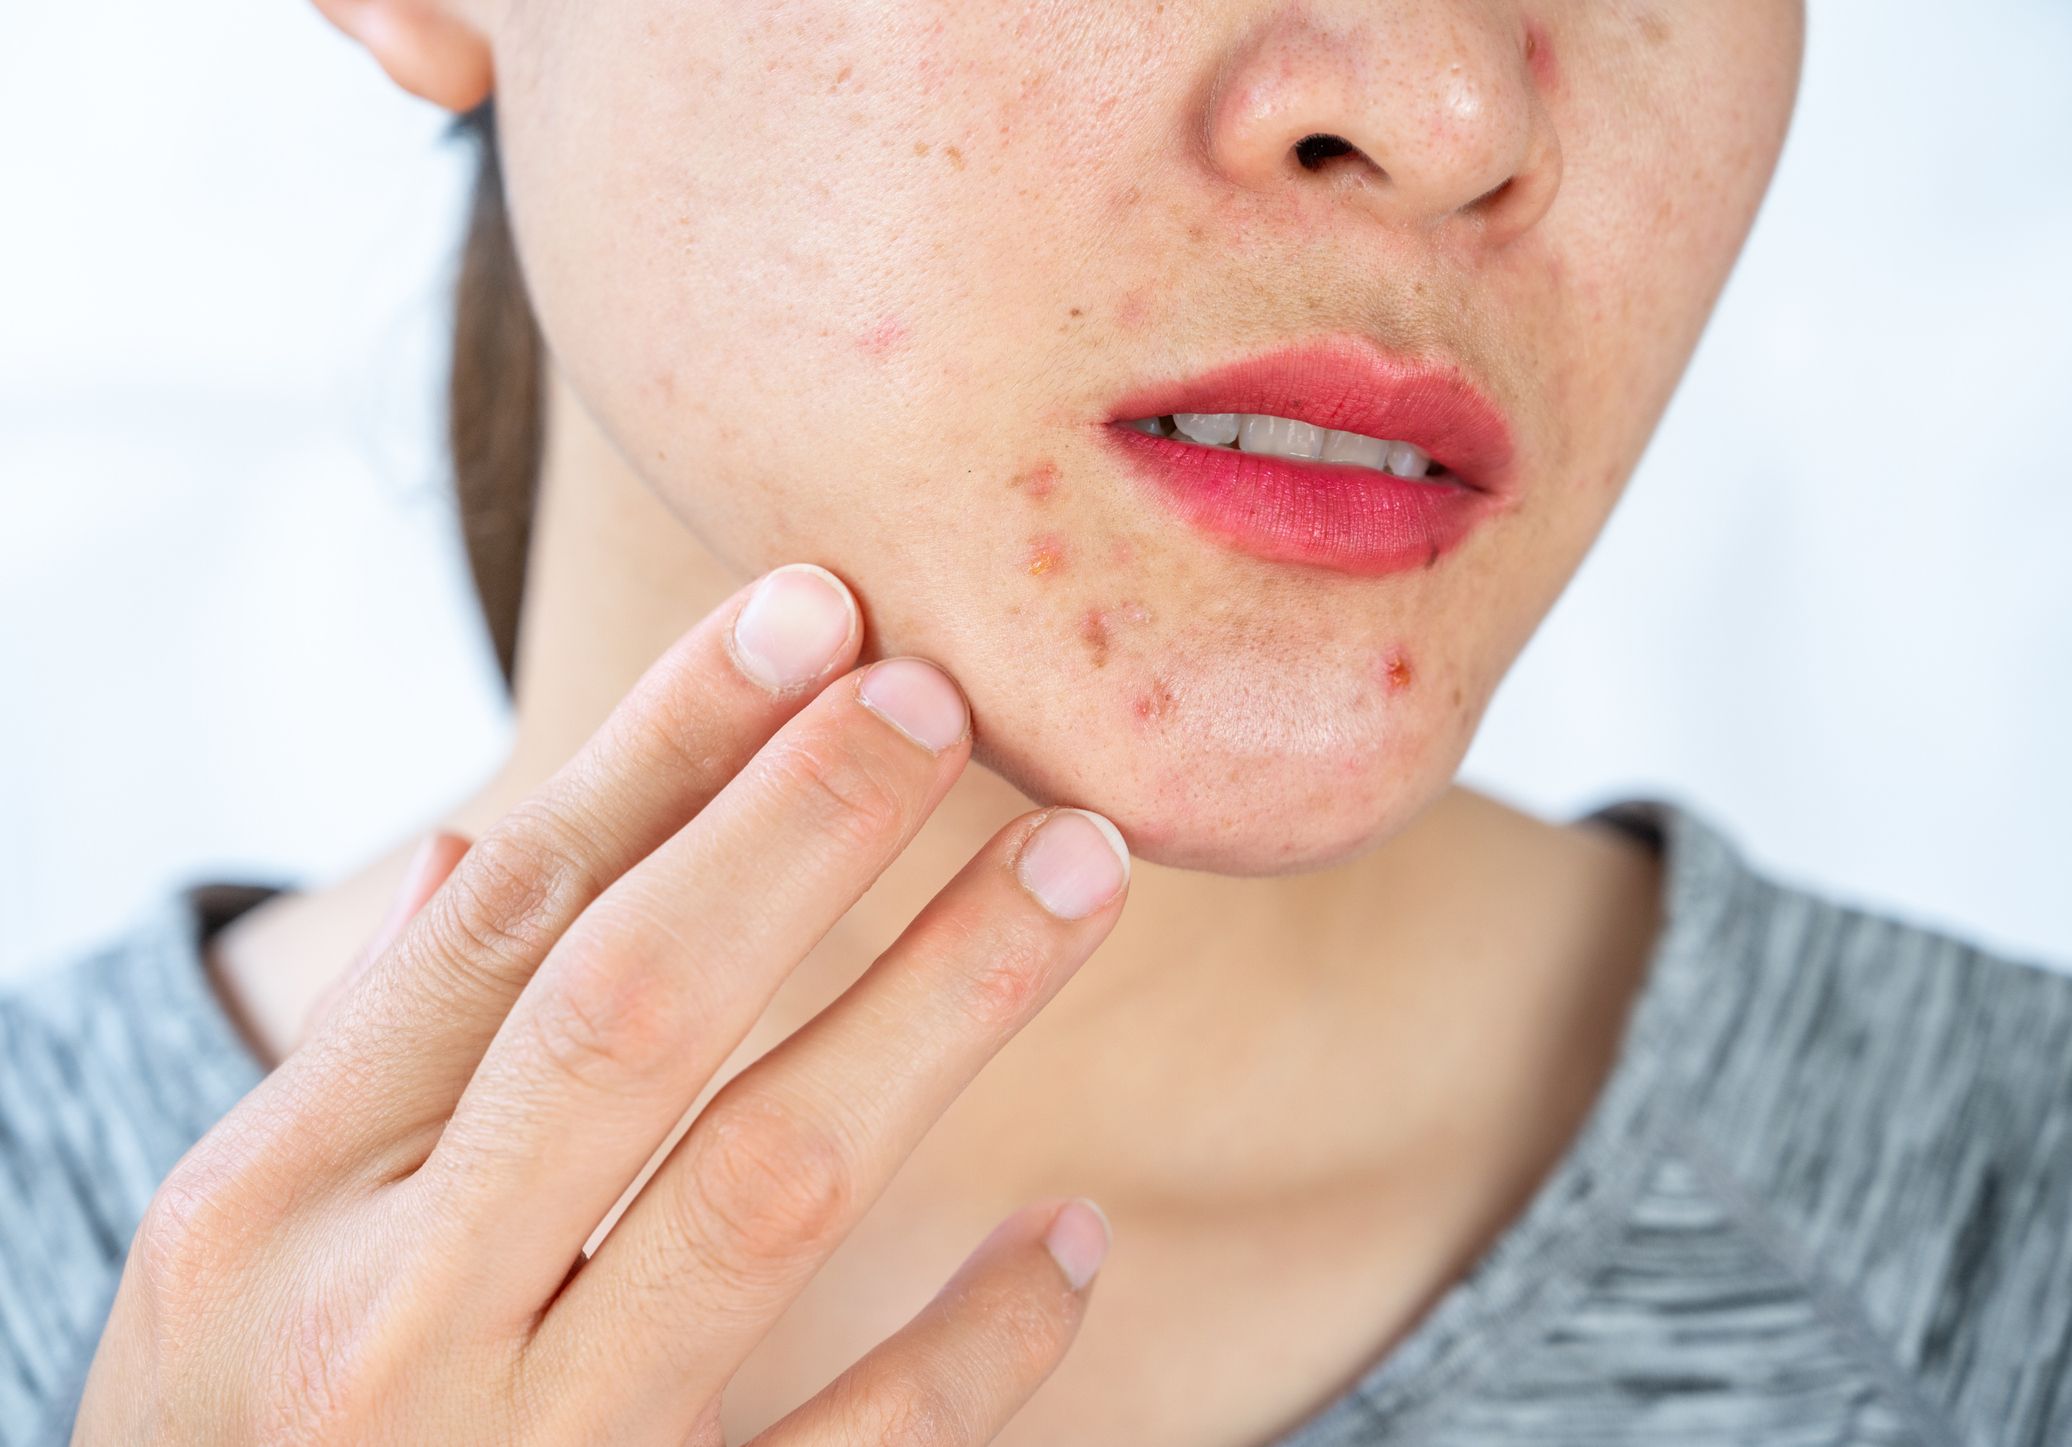 Red spots skin: causes, and when to worry